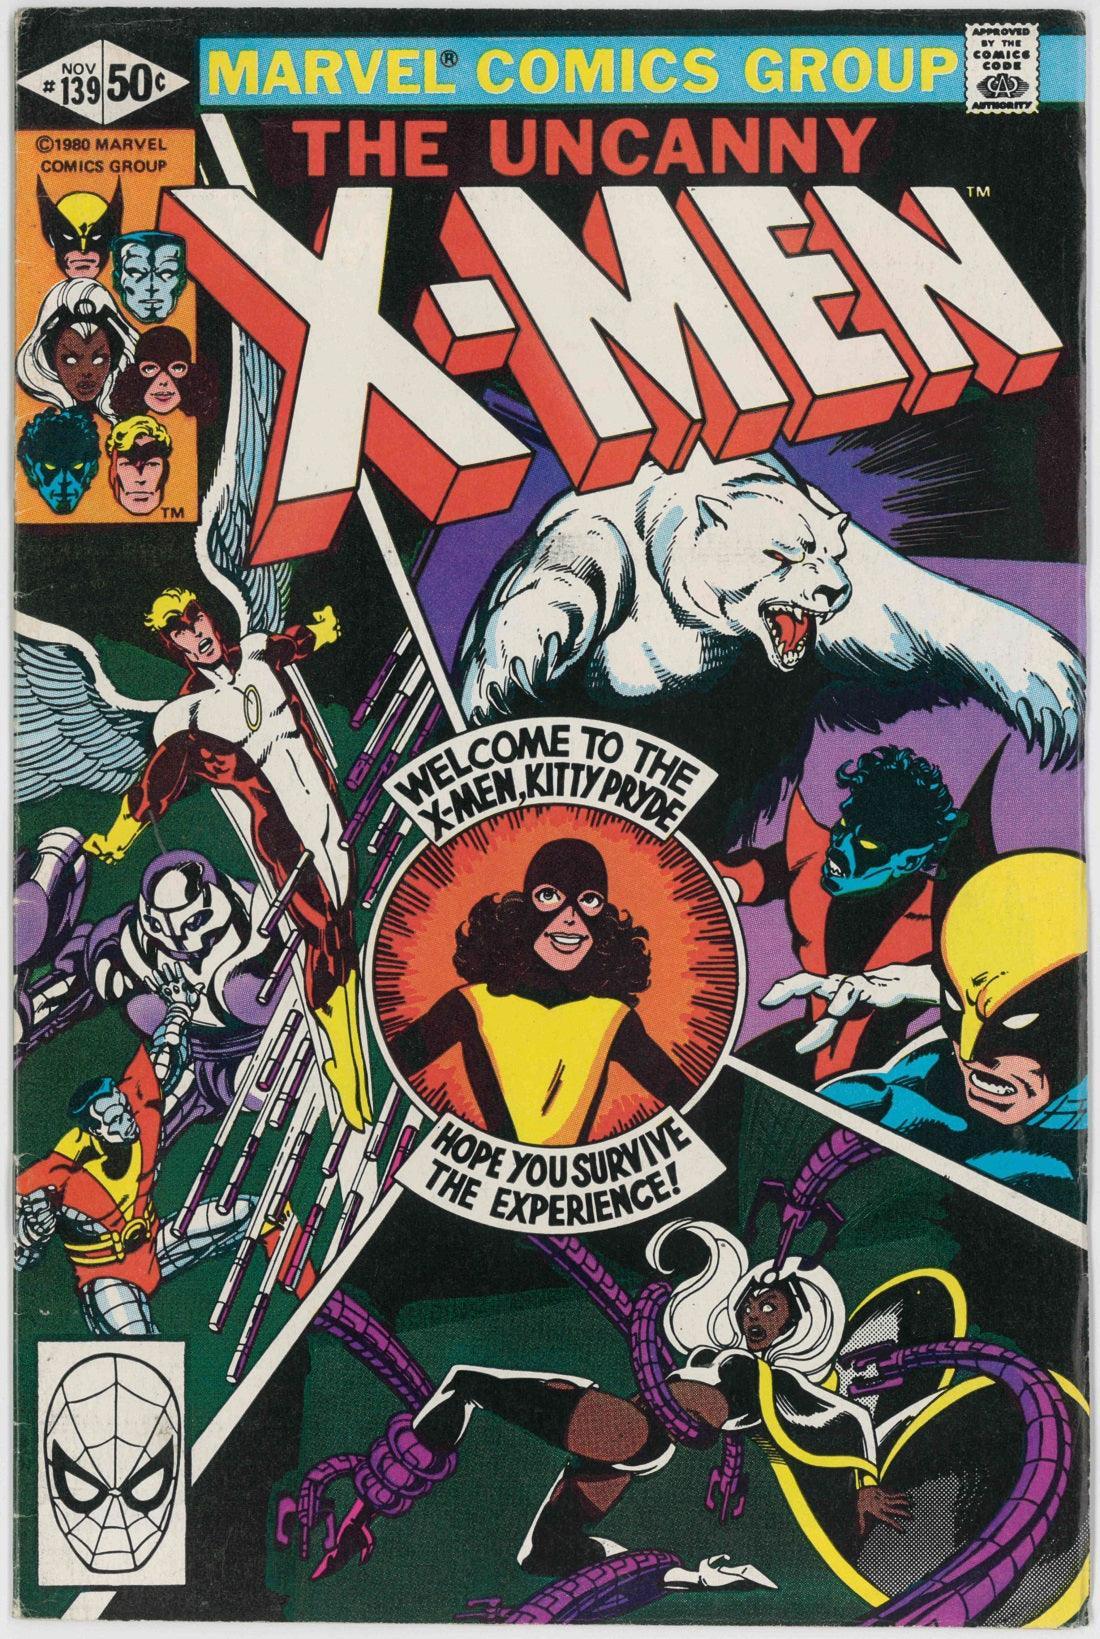 UNCANNY X-MEN (1963) #139 (VF) - FIRST APPEARANCE WOLVERINE TAN/BROWN COSTUME - Kings Comics